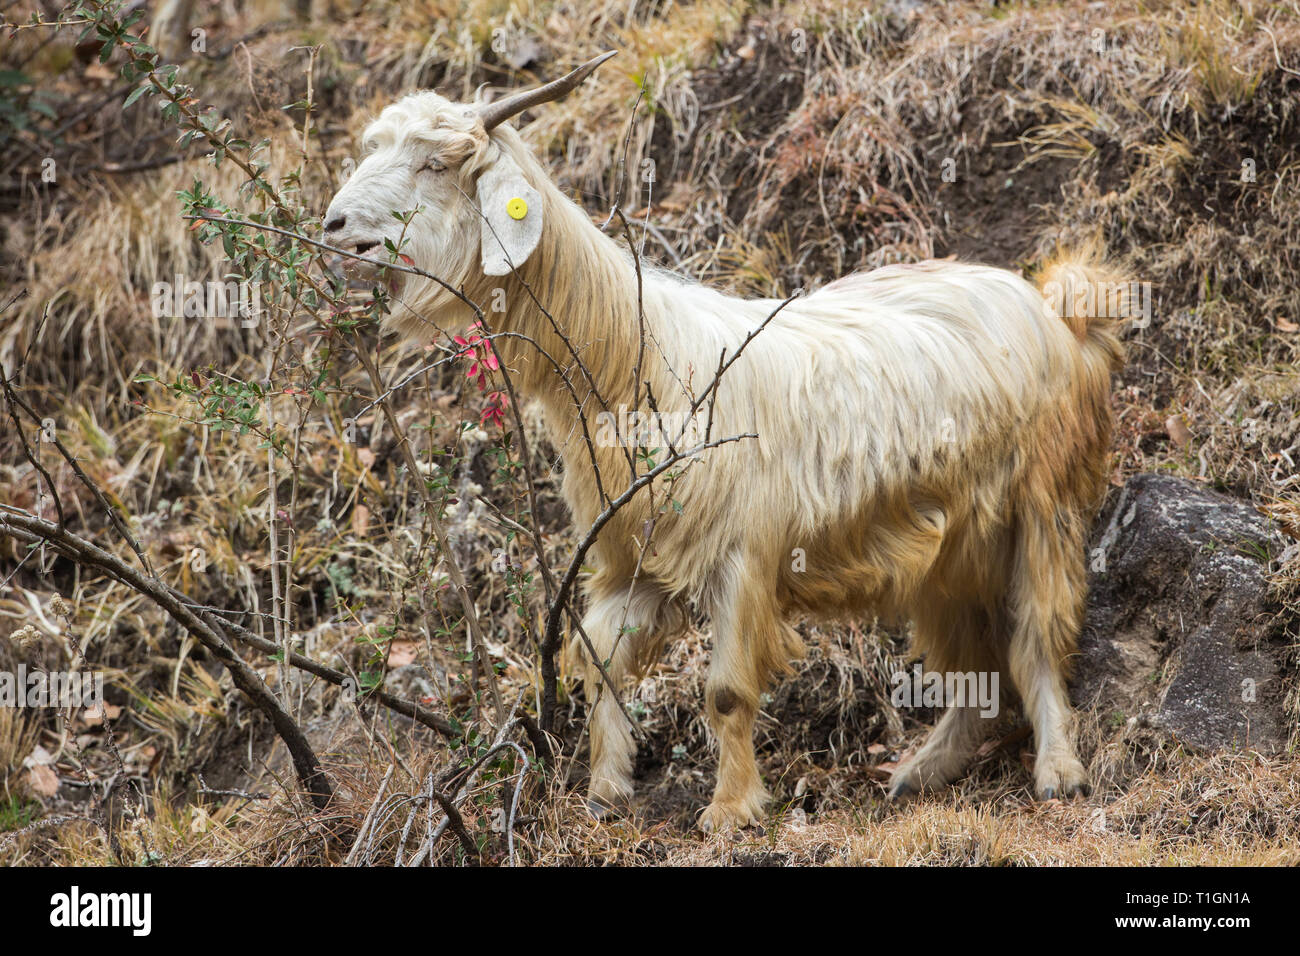 Domestic Goat  (Capra hircus). A mountain breed, one of a herd, a horned animal. Goat’s horns have a well-developed keel on the anterior edge. Browsing leaves from a prickly shrub. Foothills of the Himalayas. Northern India. Stock Photo